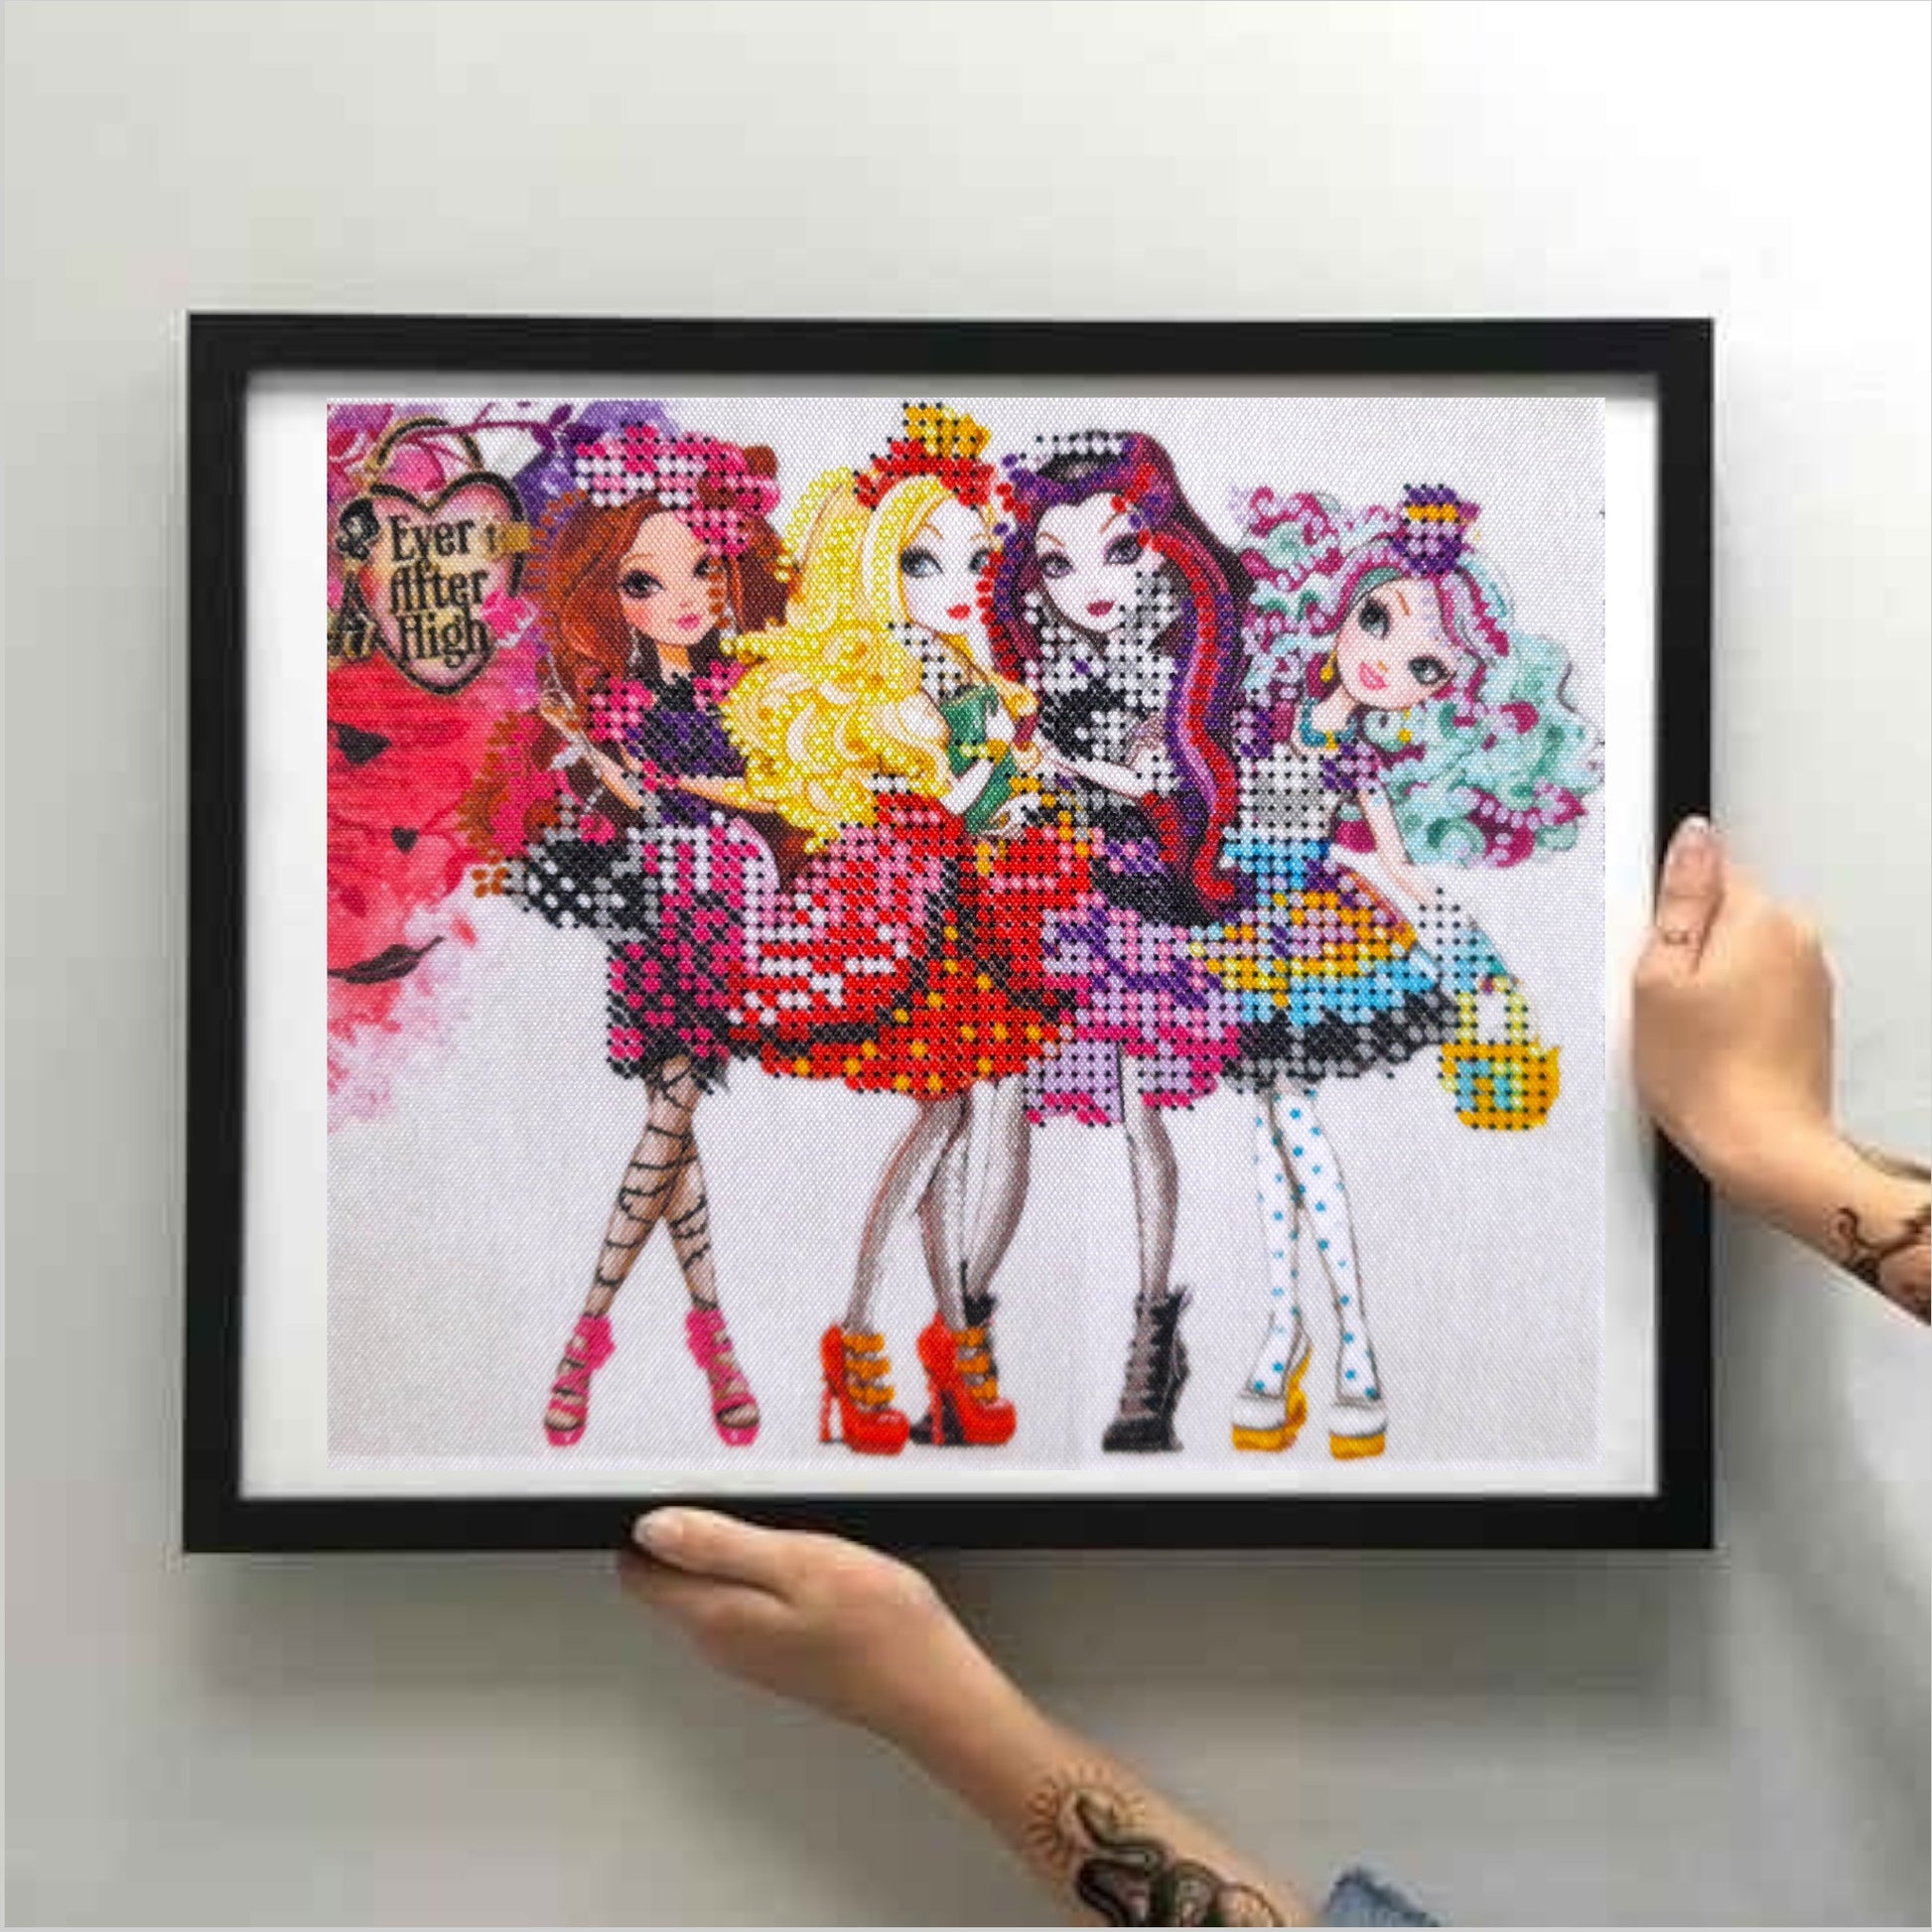 DIY Bead embroidery kit "Ever, Afteer and High". Size: 6.3-5.1in (16.8-13.7cm) - VadymShop